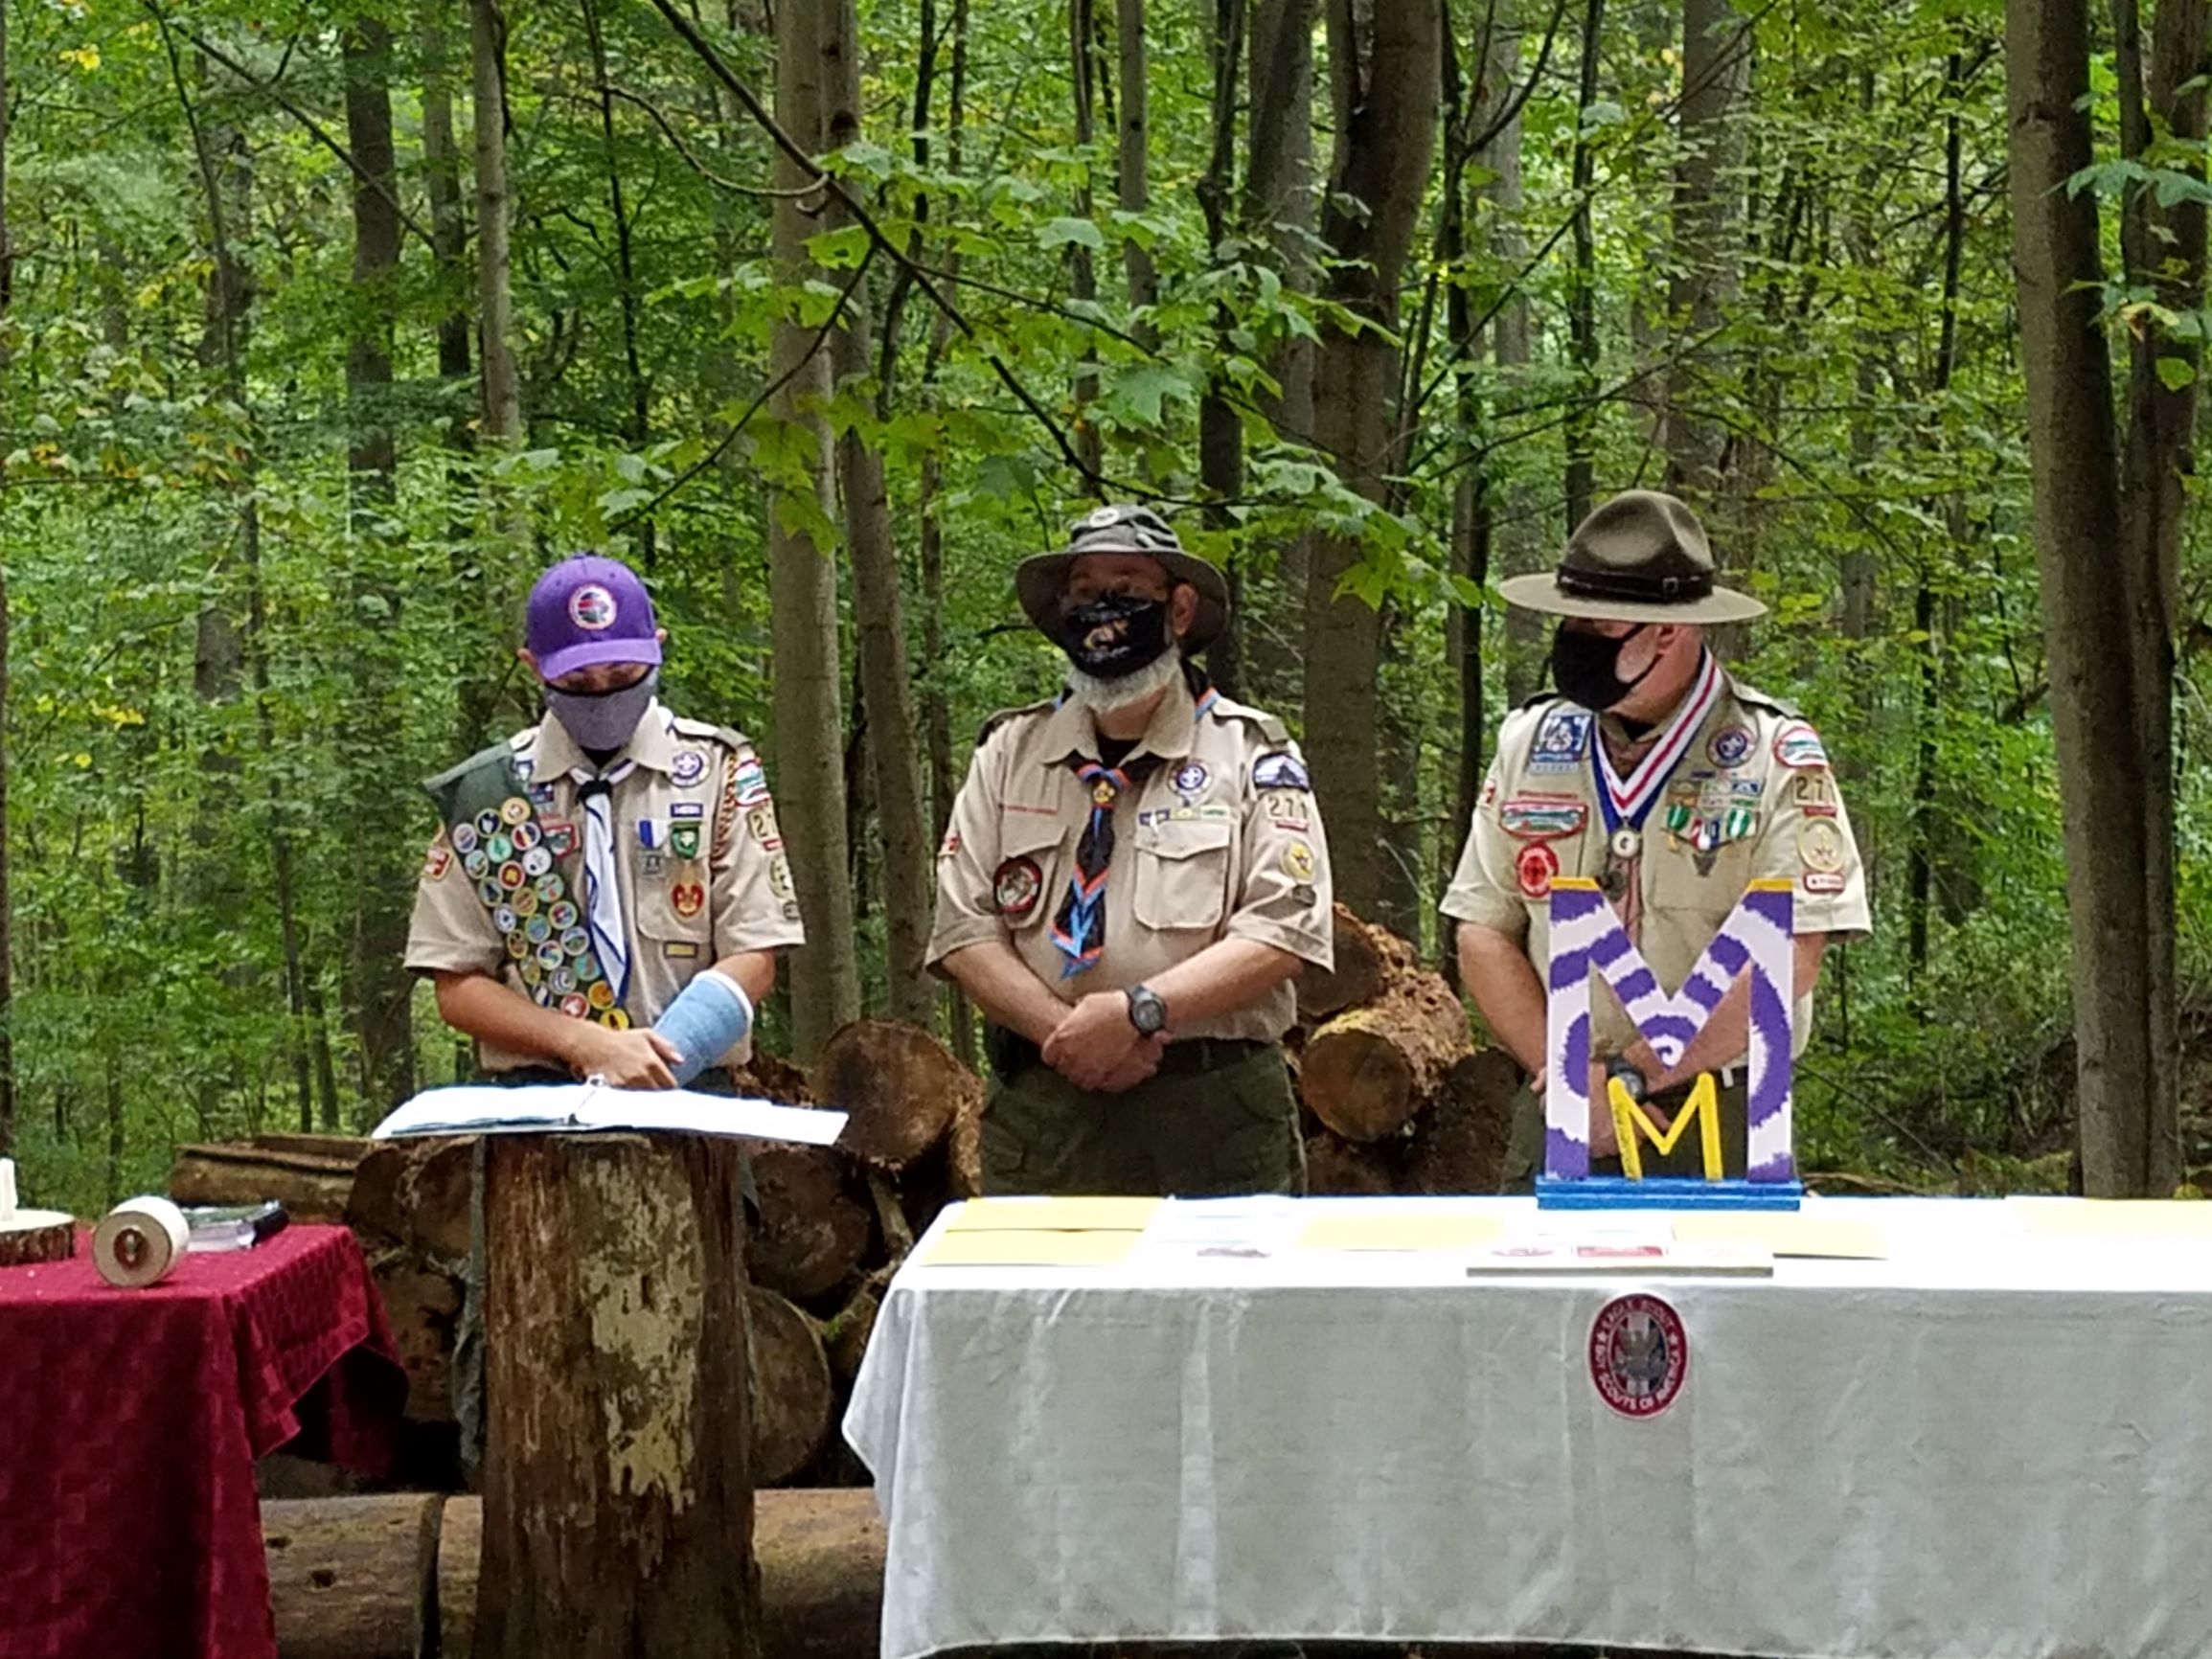 Leaders at Boy Scout Camping trip